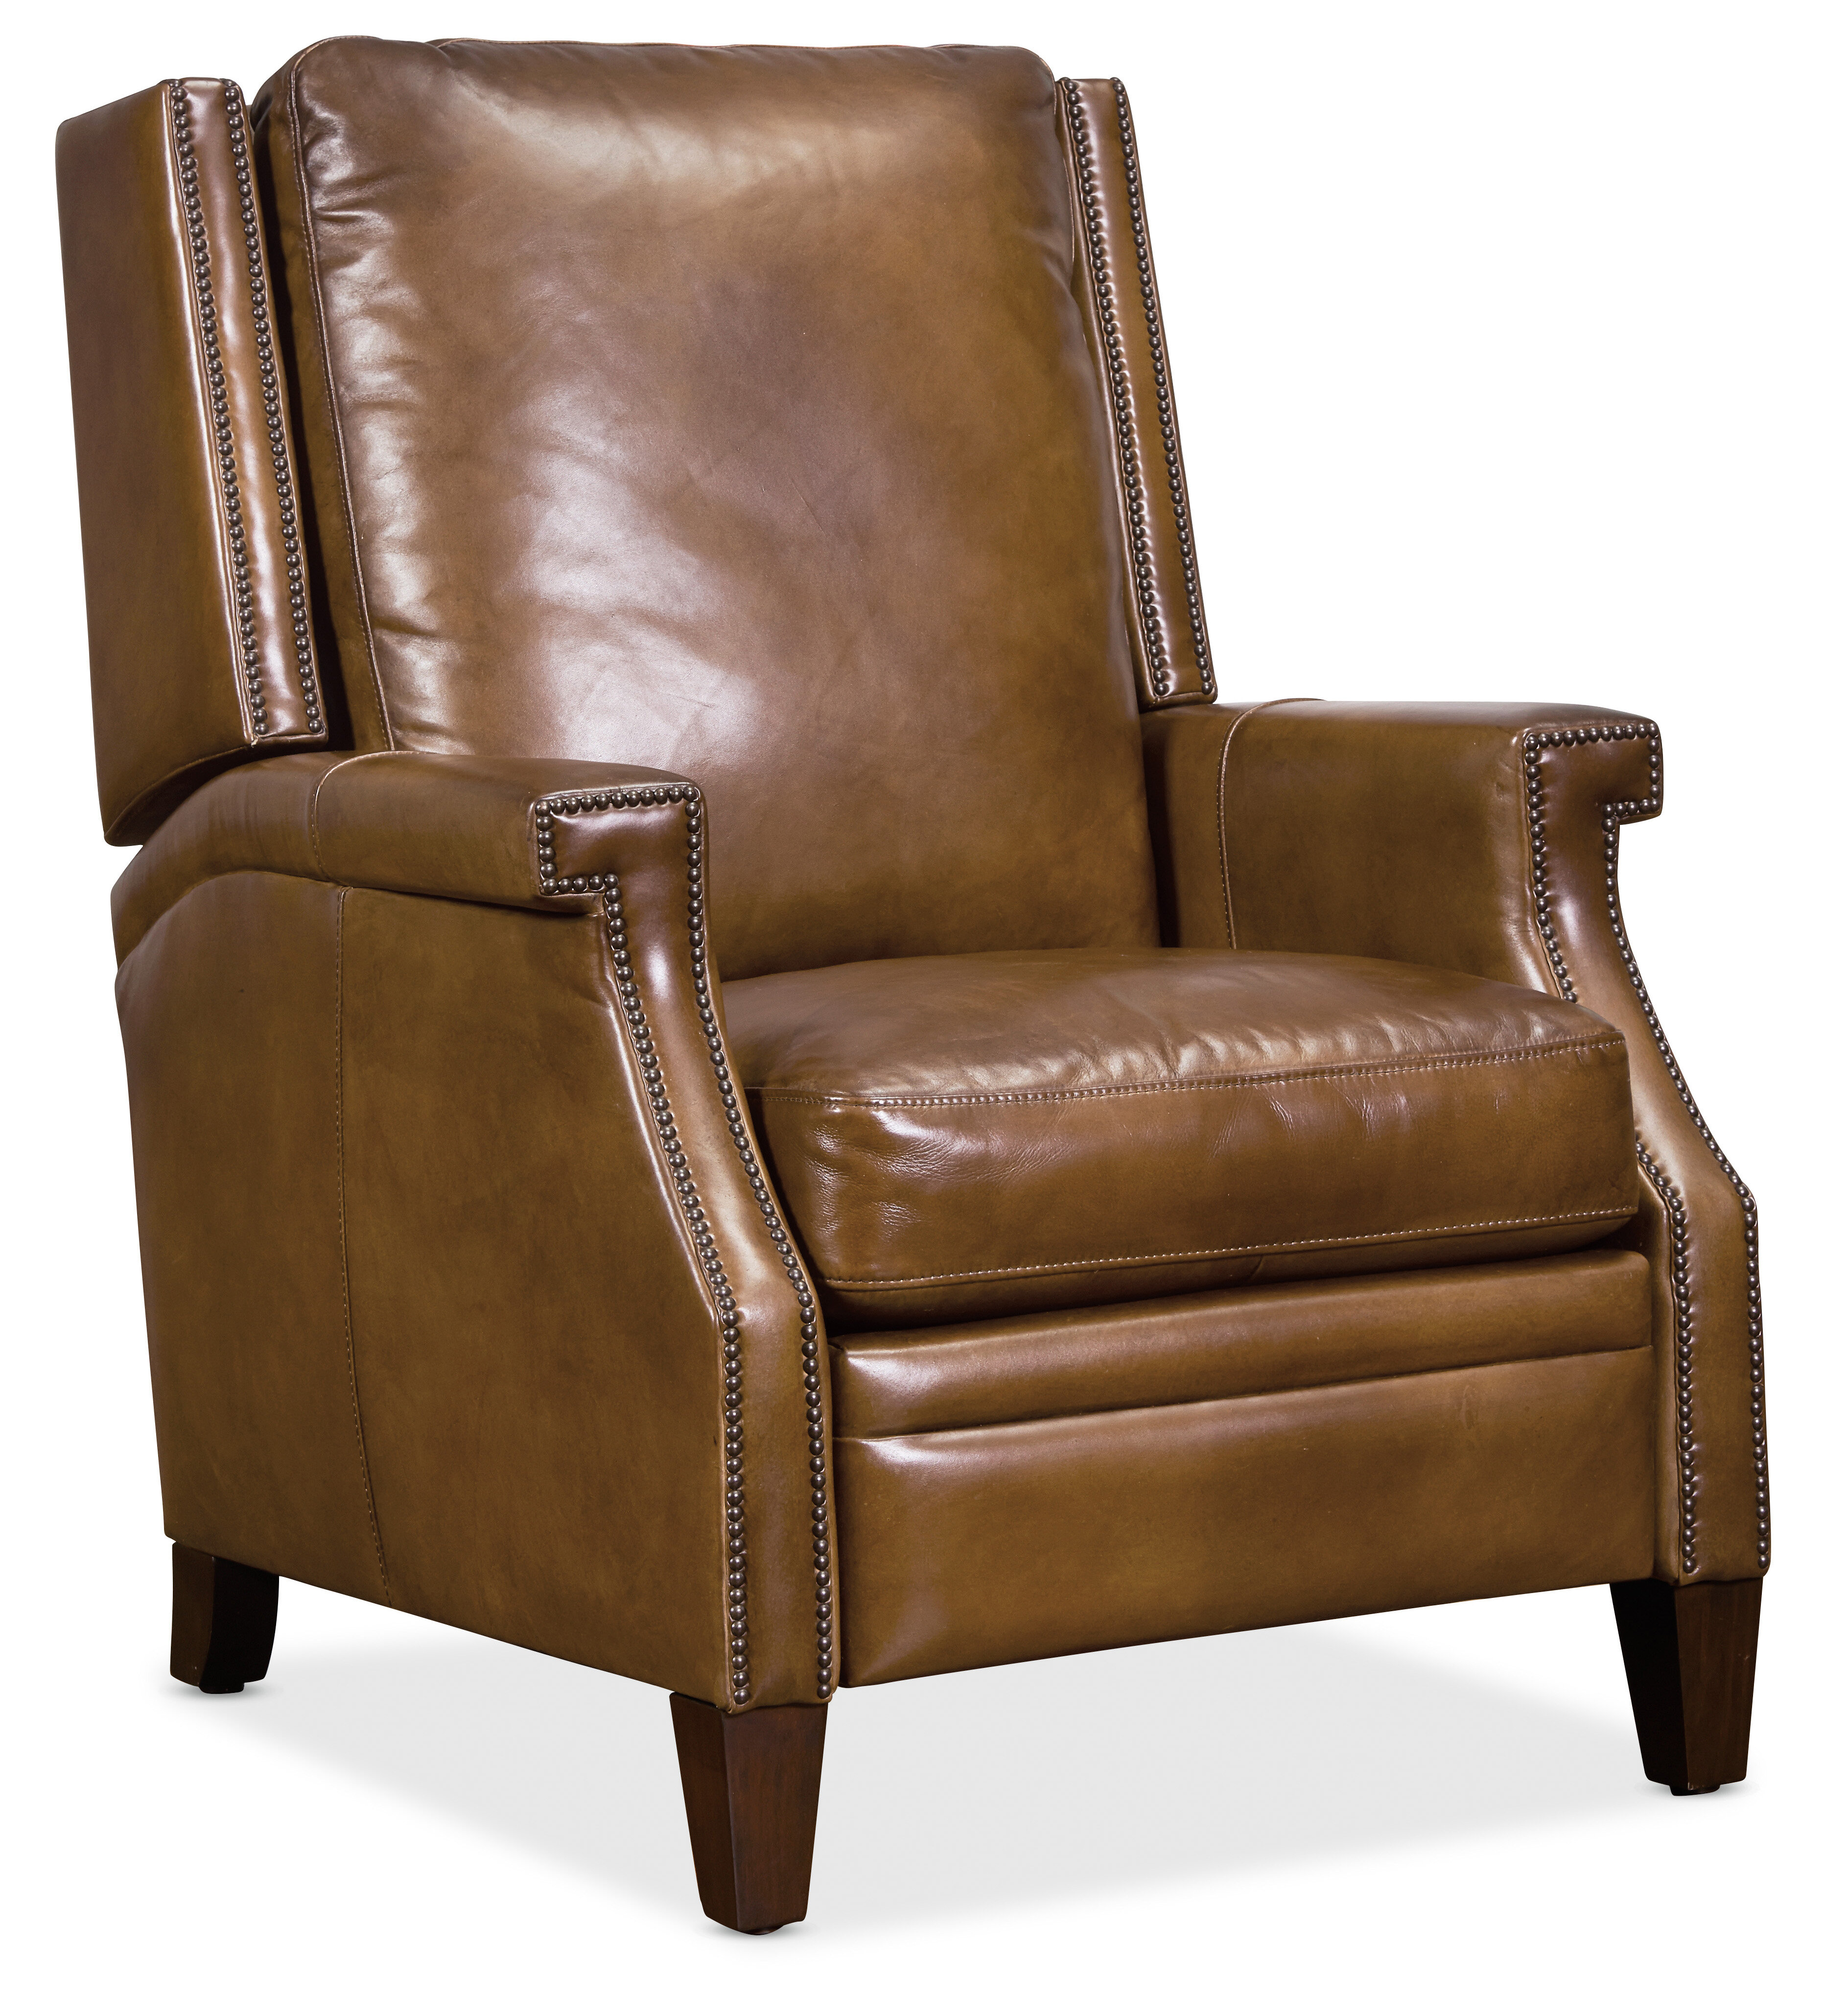 Cattlemens Leather Recliner, Western Style, Full Grain Leather